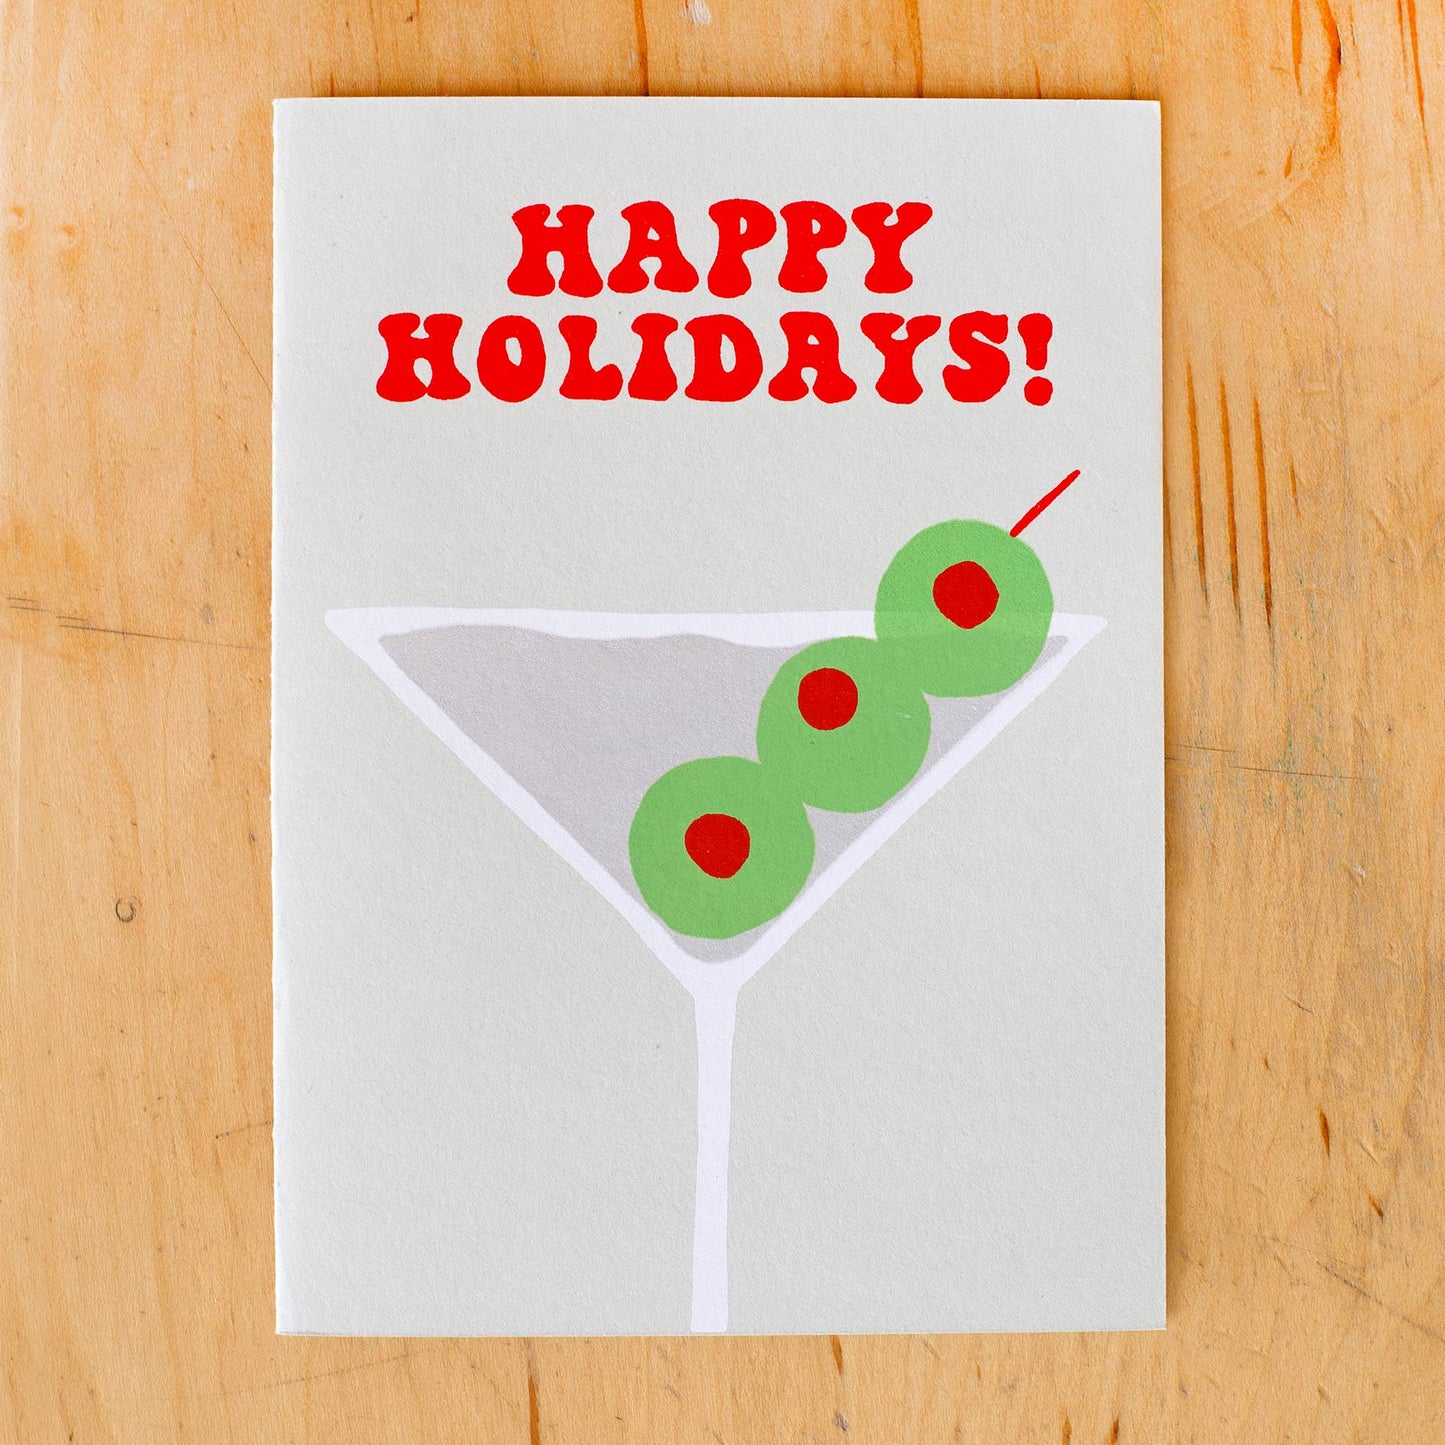 Greeting card that reads "Happy Holidays!" on top and has an image of a martini glass with 3 olives in it 